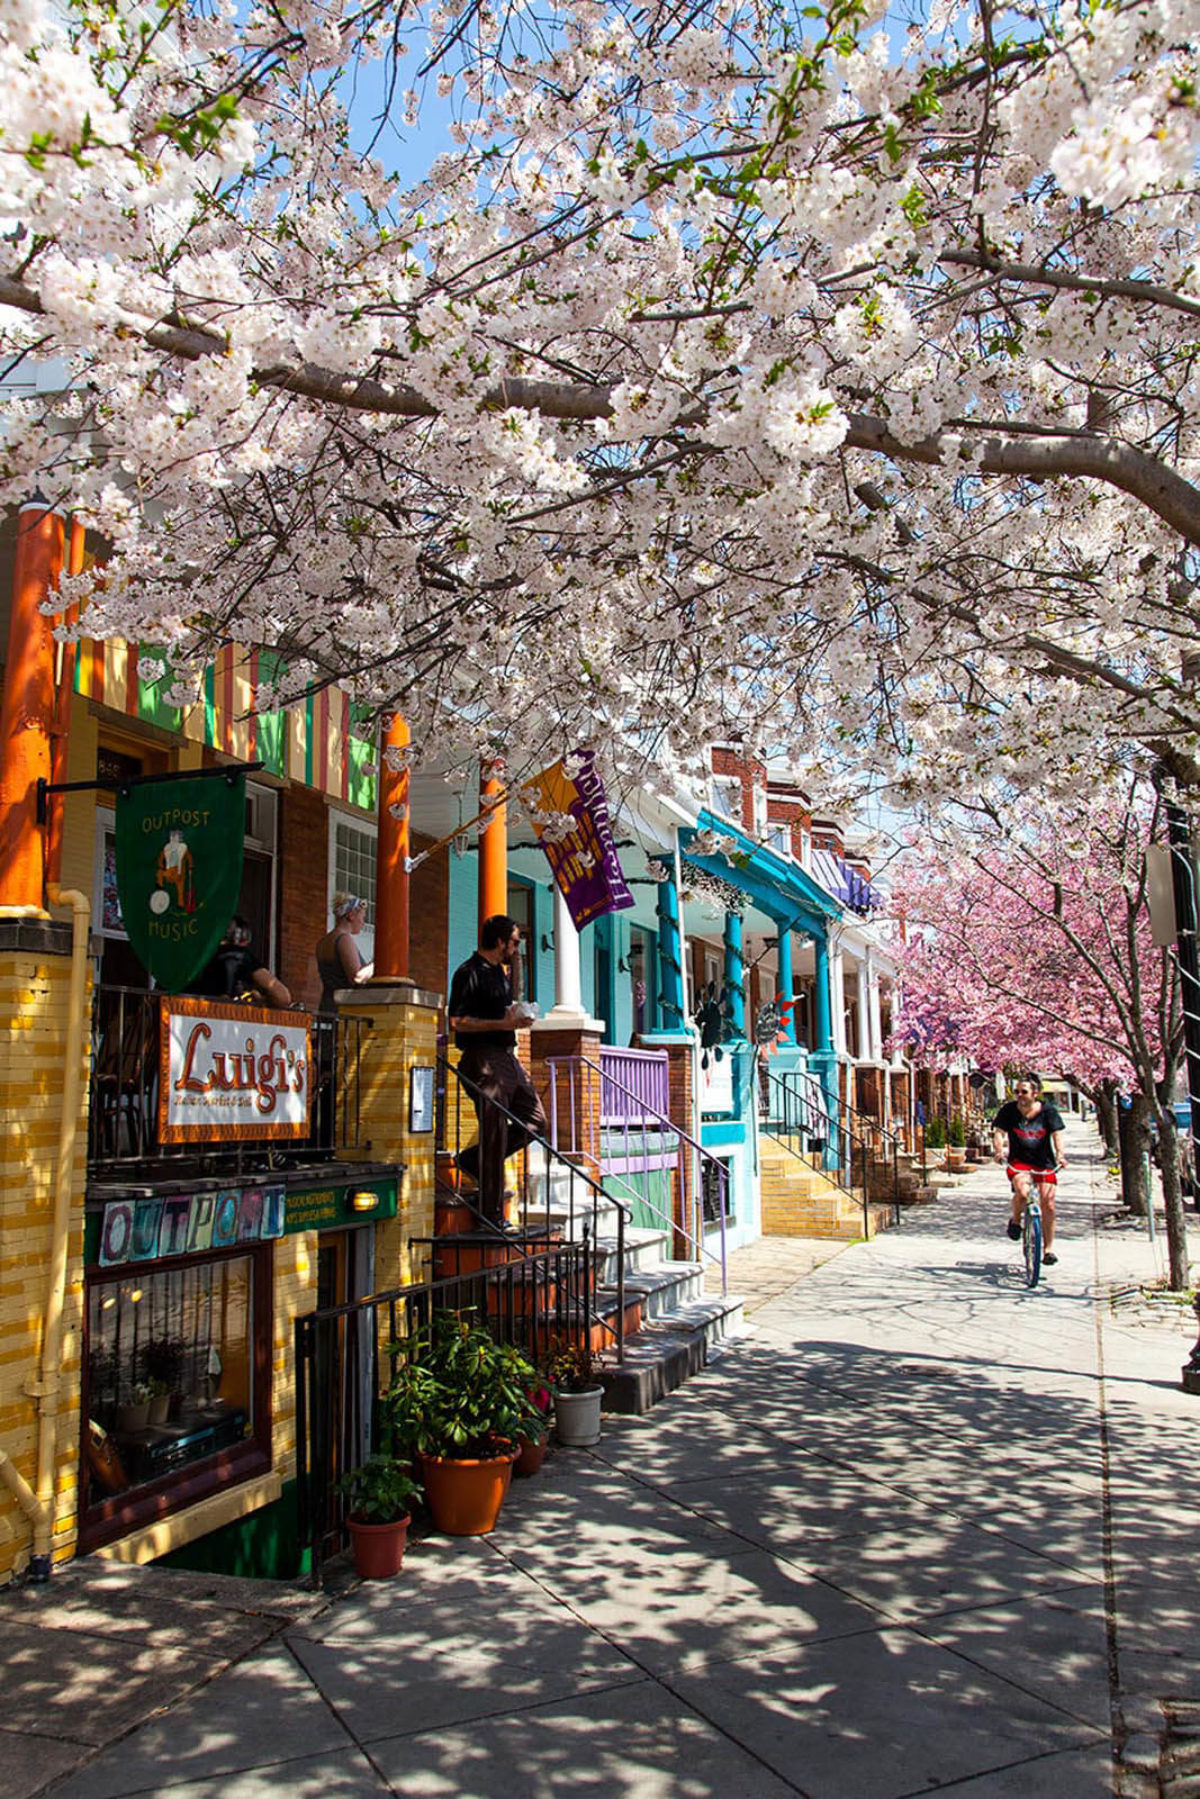 Looking down the street during the spring in Hampden, Baltimore.